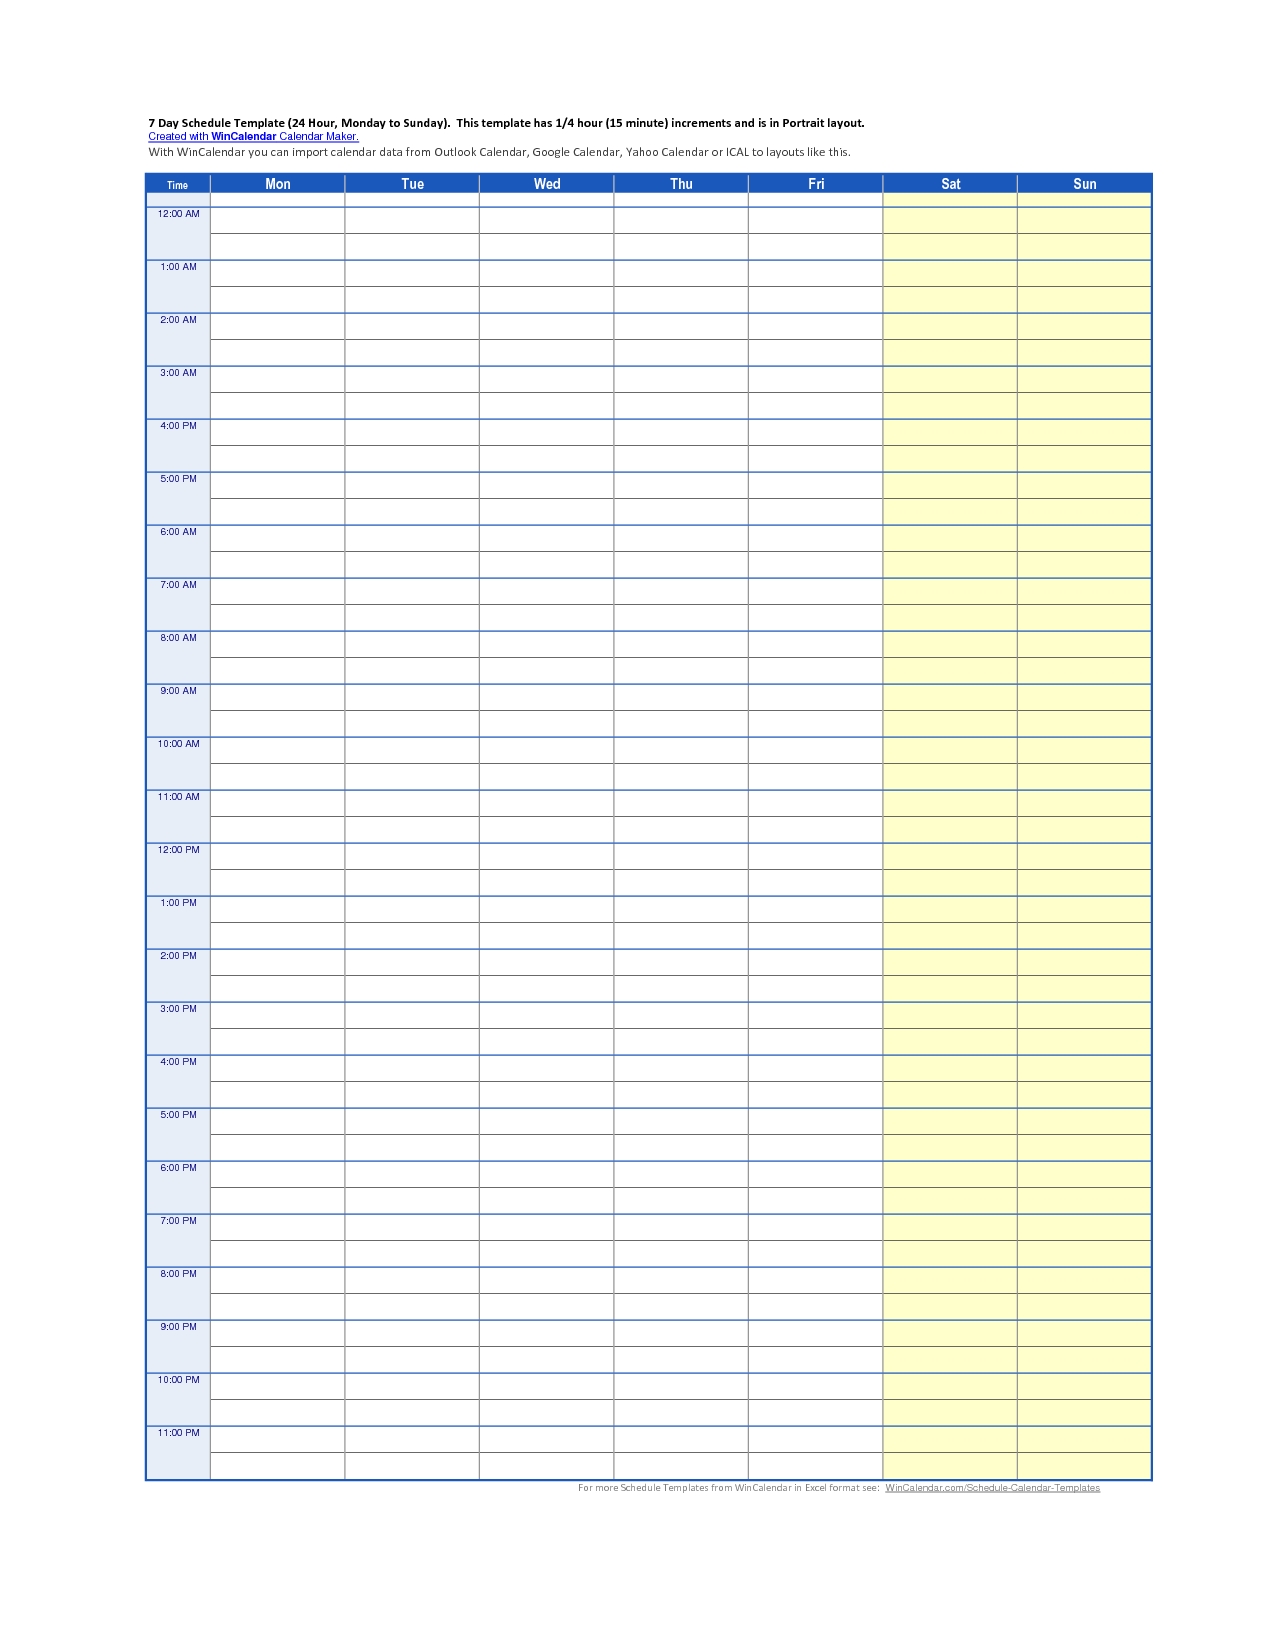 28 Images Of 15 Minute Increment Schedule Template within 7 Day 15 Minute Schedule